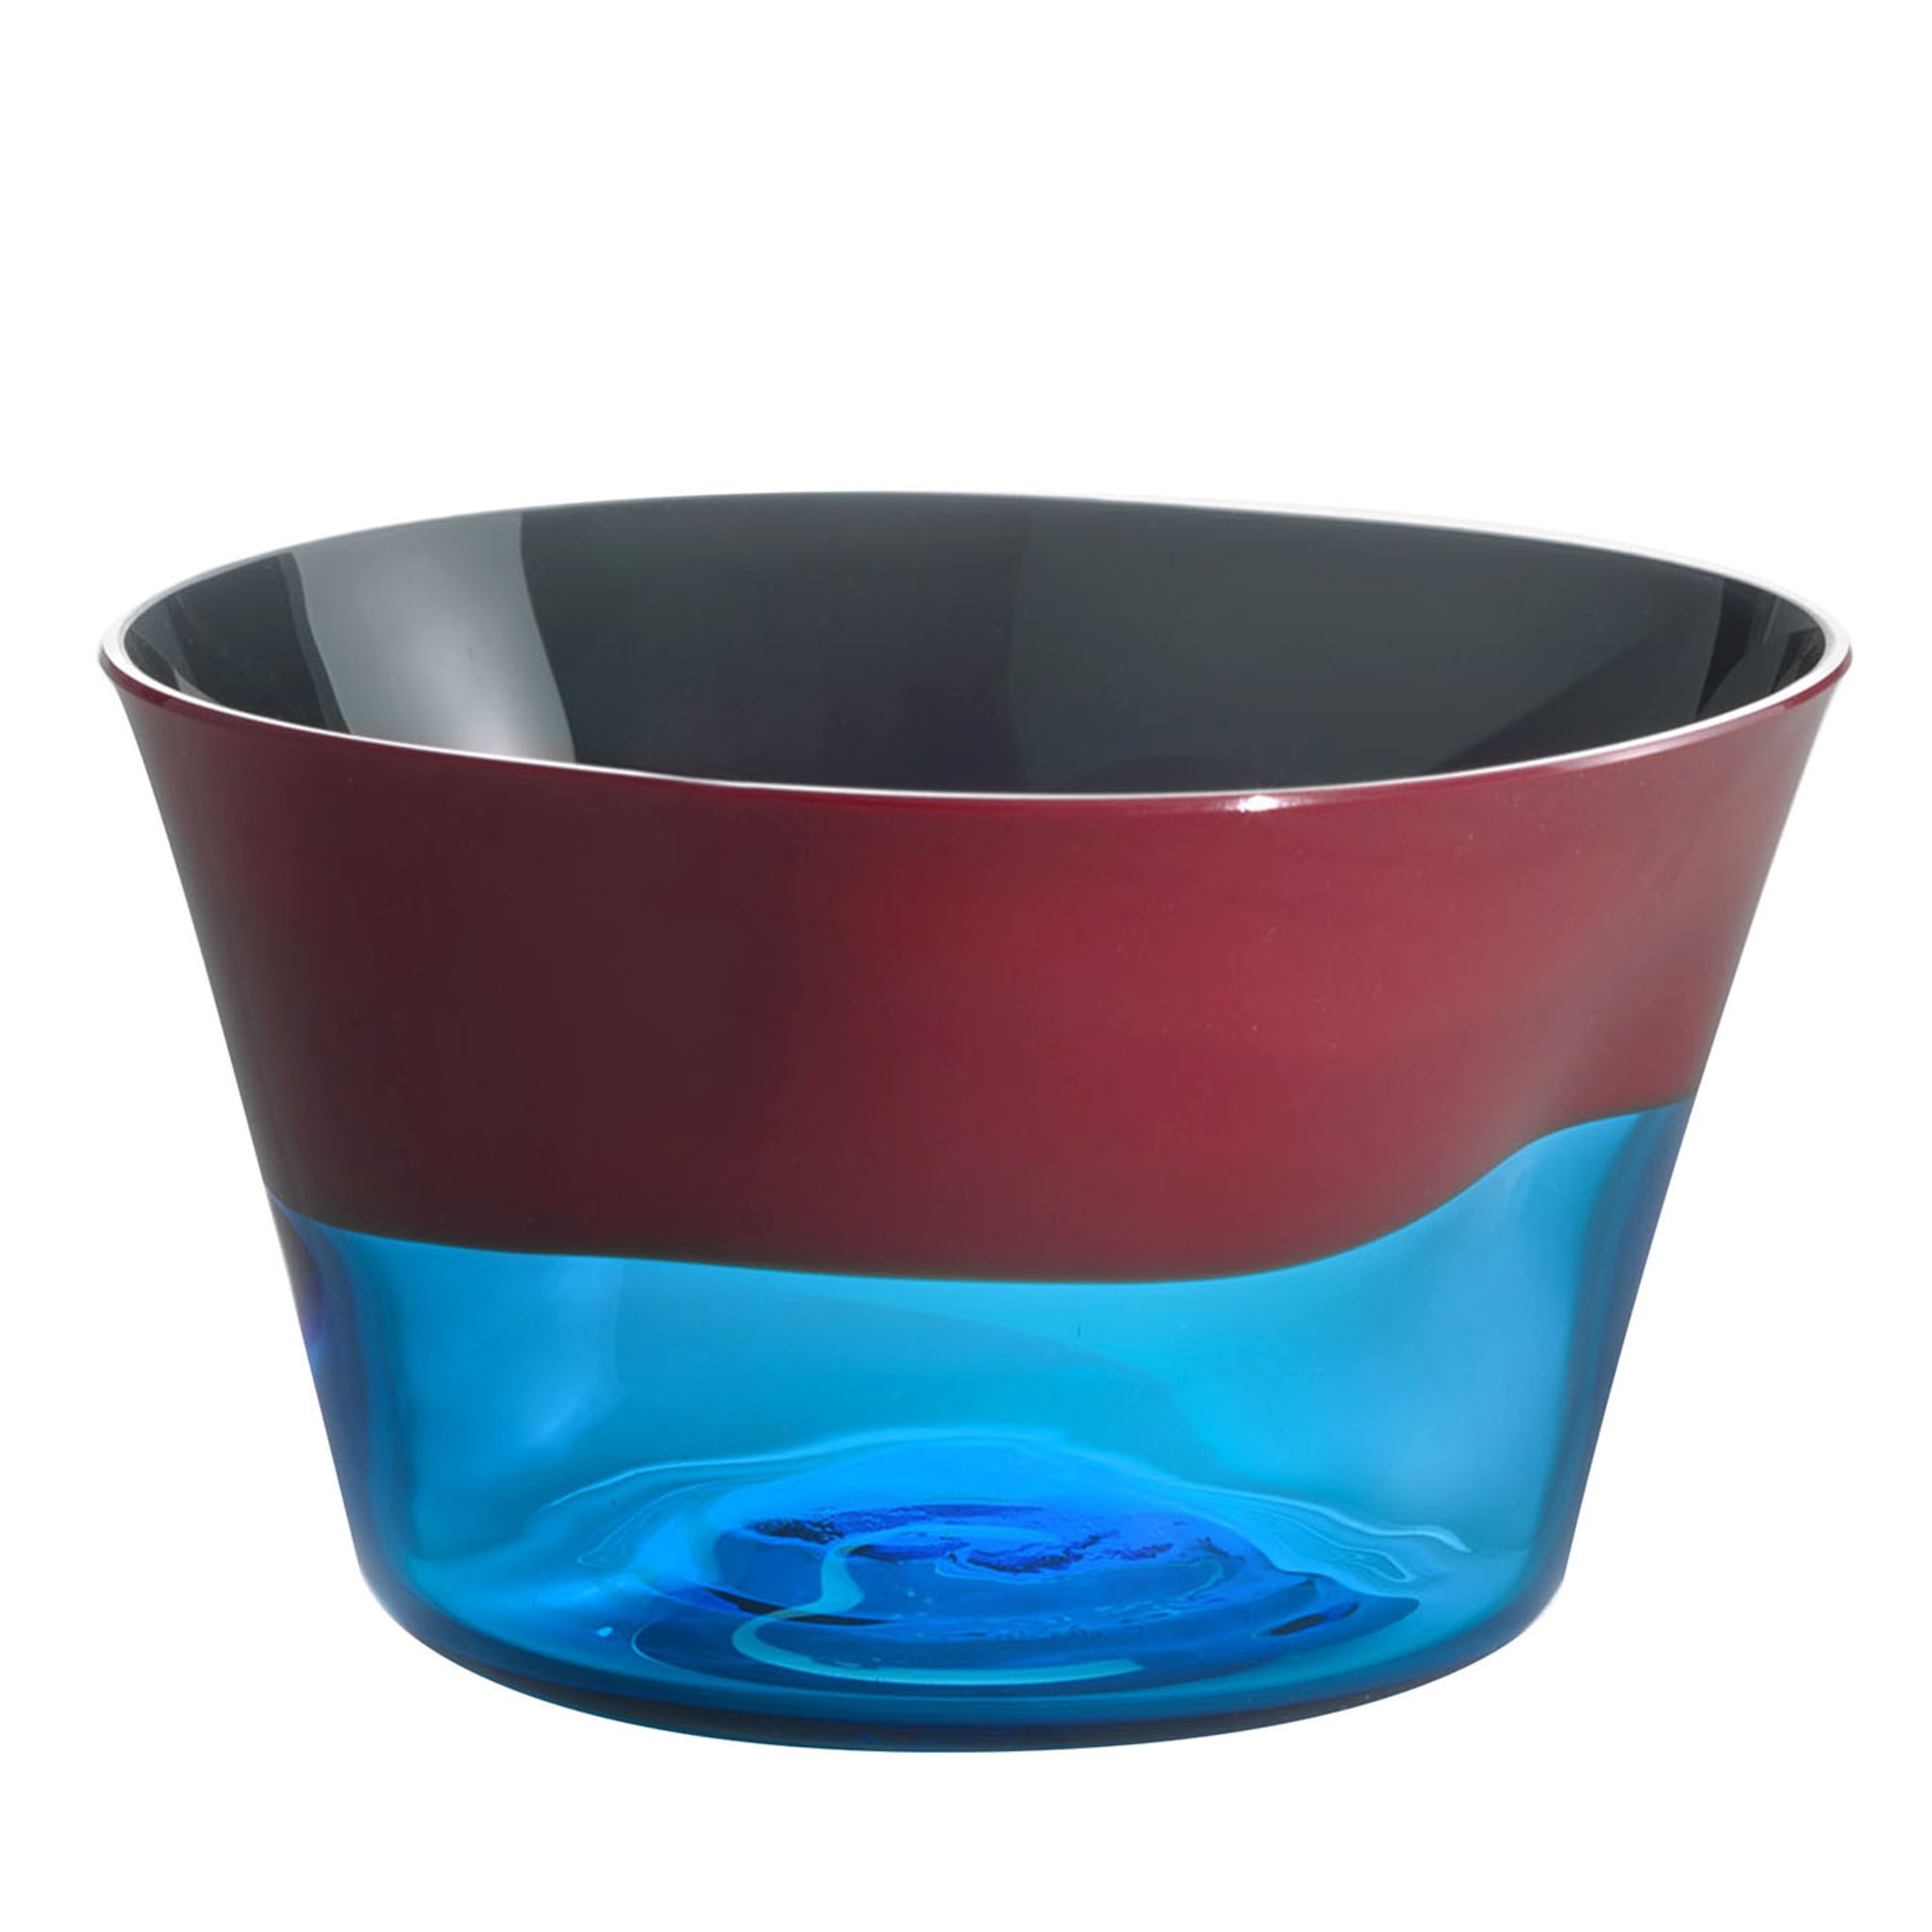 Dandy Small Coral & Blue Bowl by Stefano Marcato - Main view